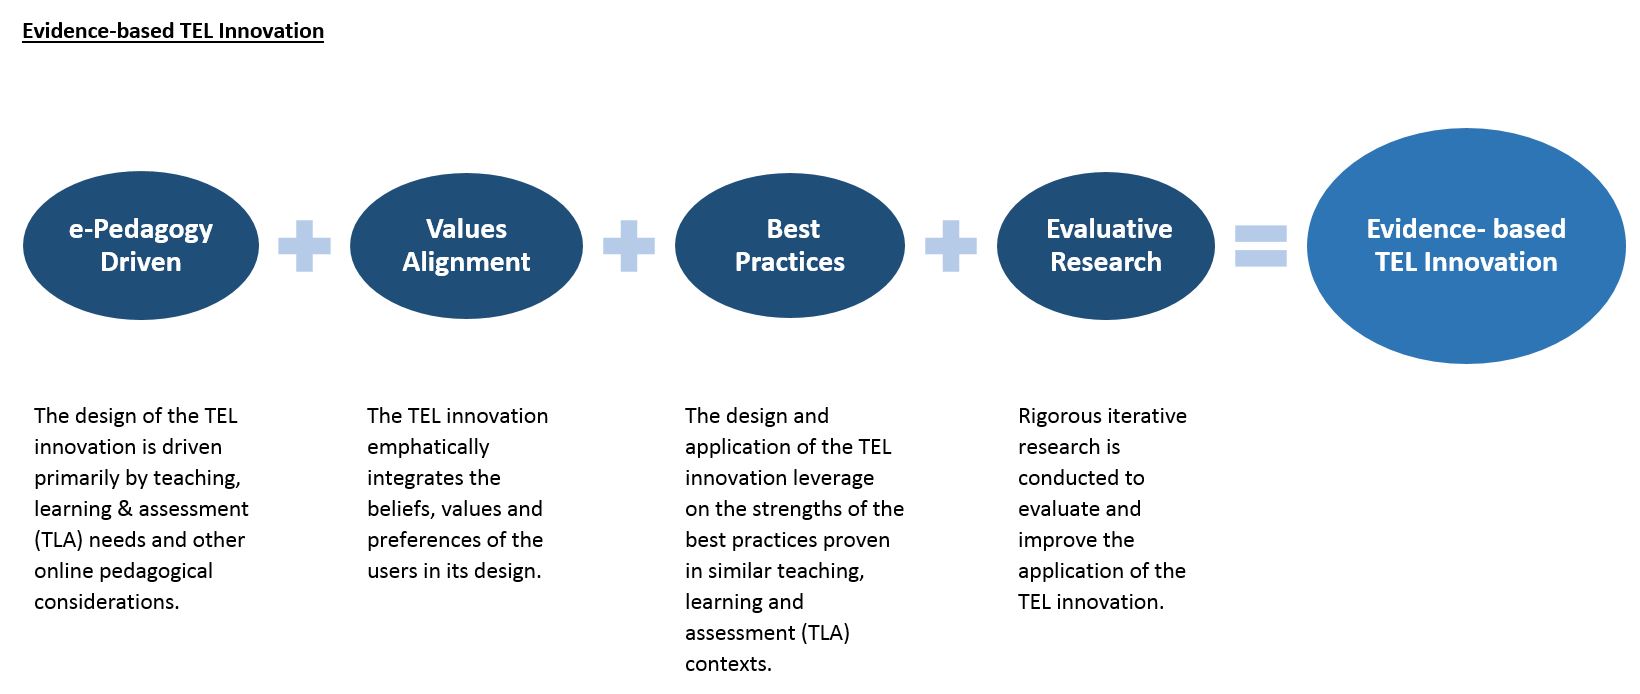 e-Pedagogy Driven, Values Alignment, Best Practices and Evaluative Research make up Evidence-based TEL Innovation.